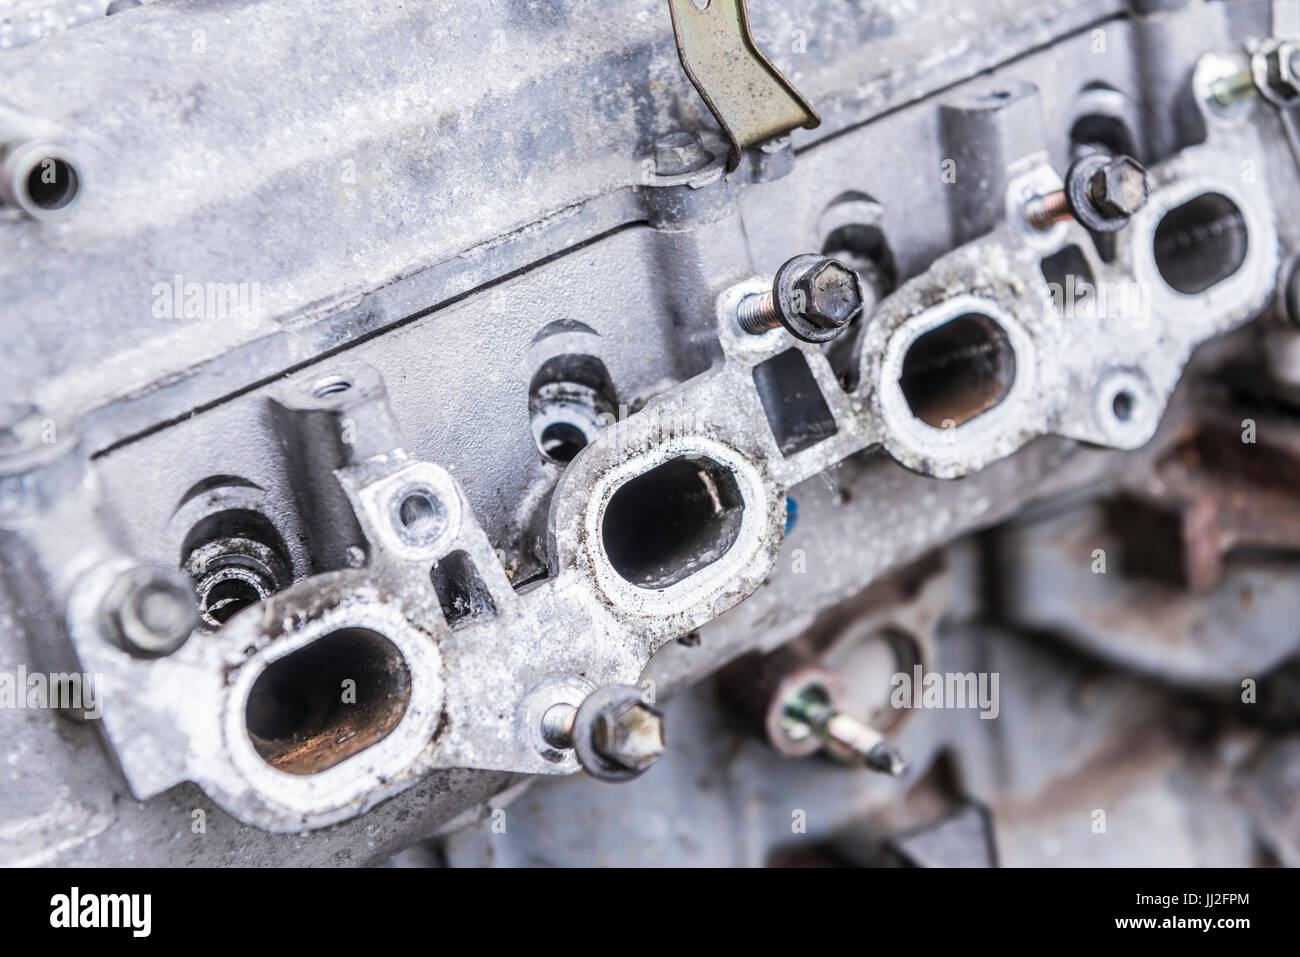 Exhaust gas exit ports on an old engine block with the exhaust manifold removed. Stock Photo